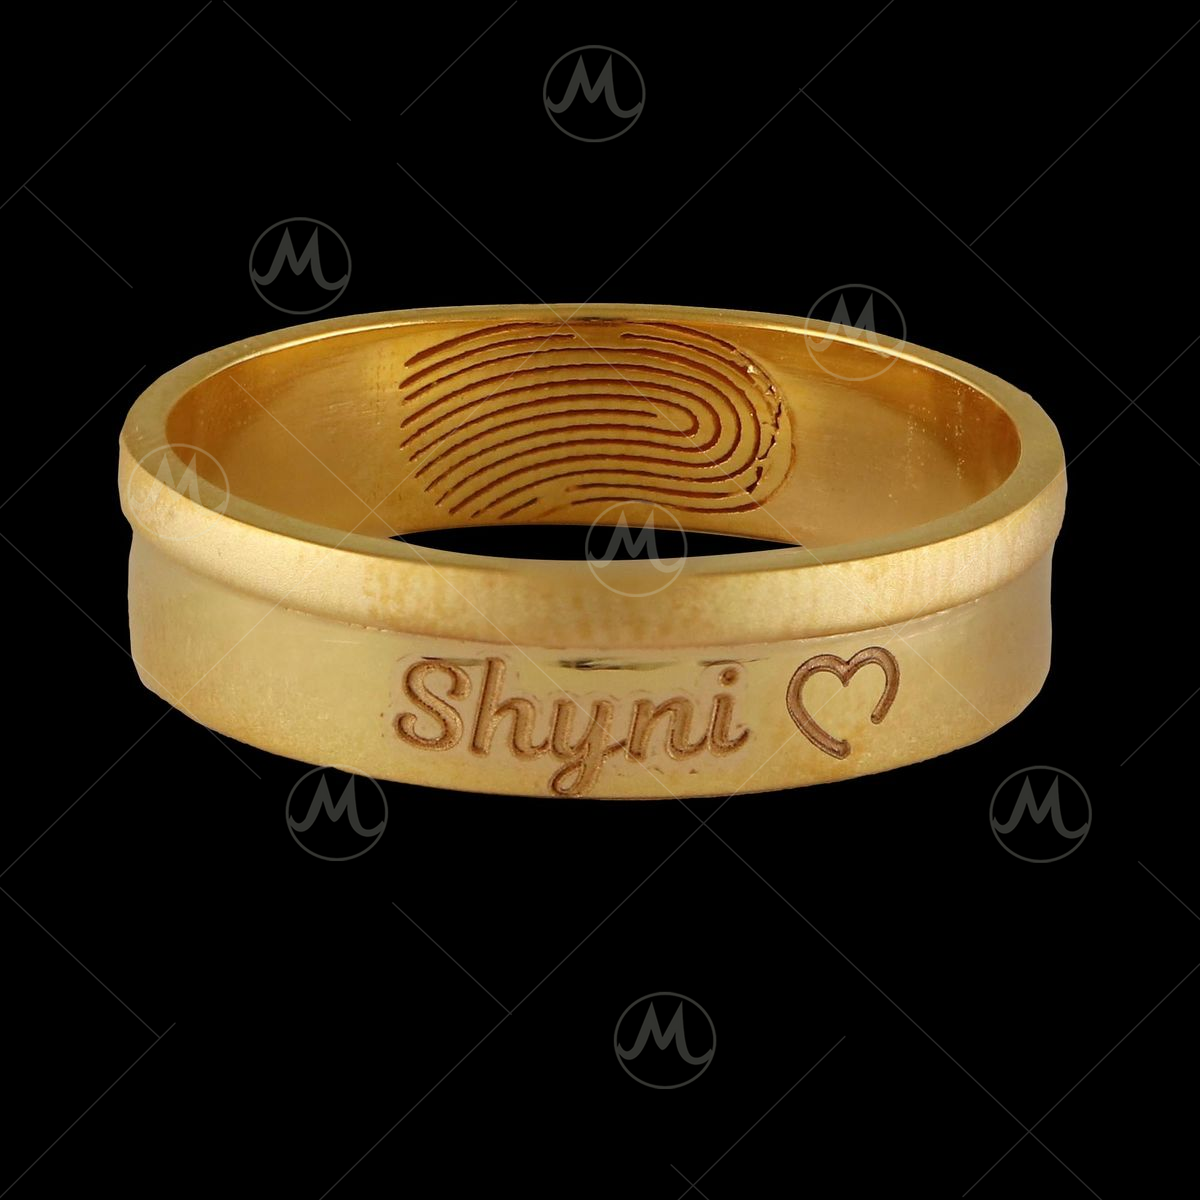 Classic Name Engraved Couple Ring | Silver Ring For Couples